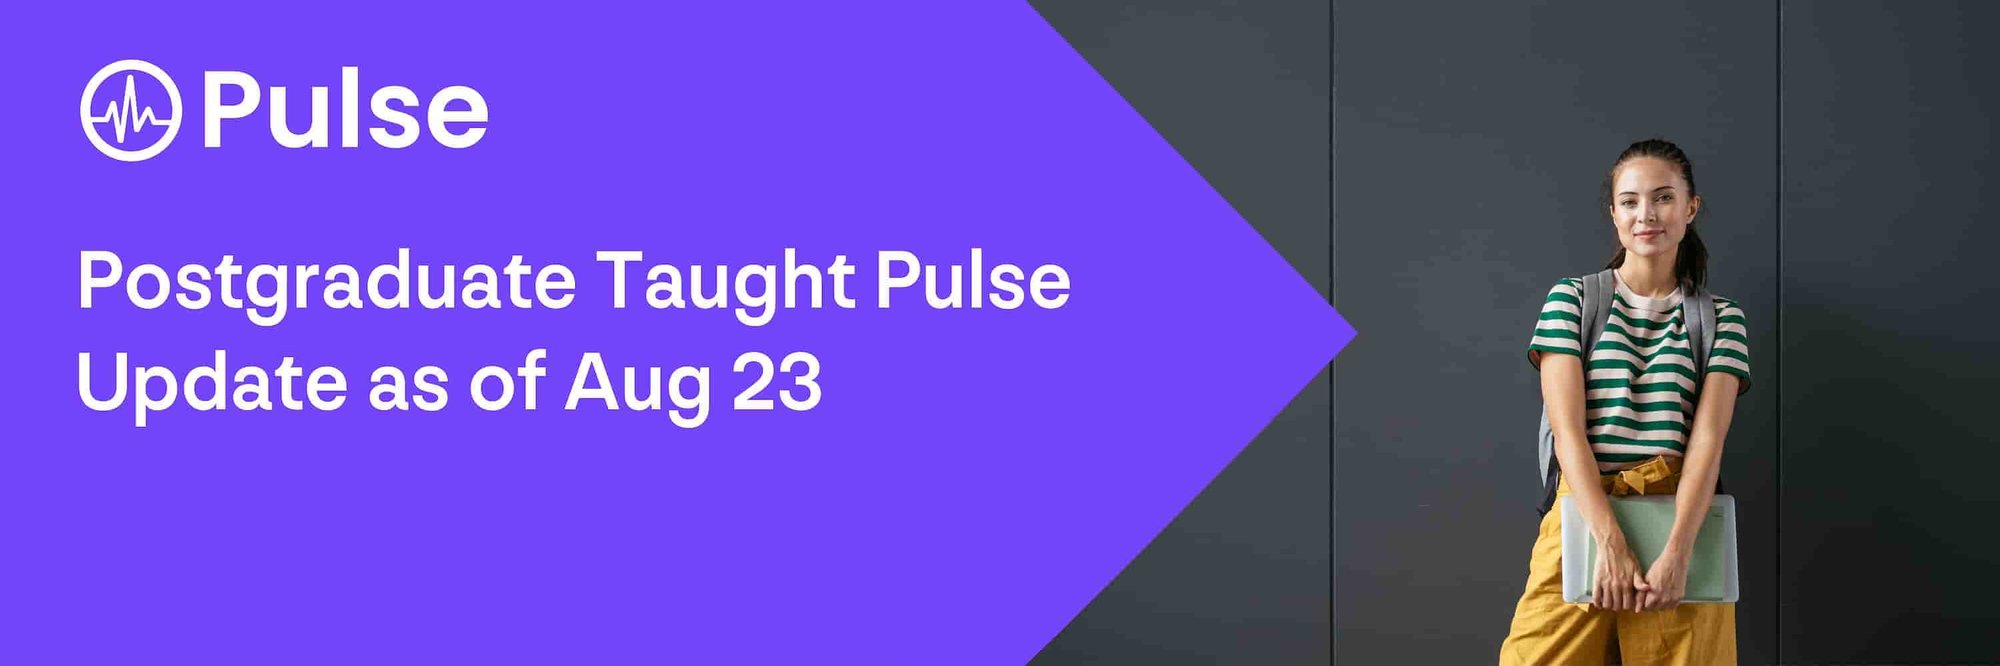 Pulse Postgraduate Taught Pulse Update as of Aug 23